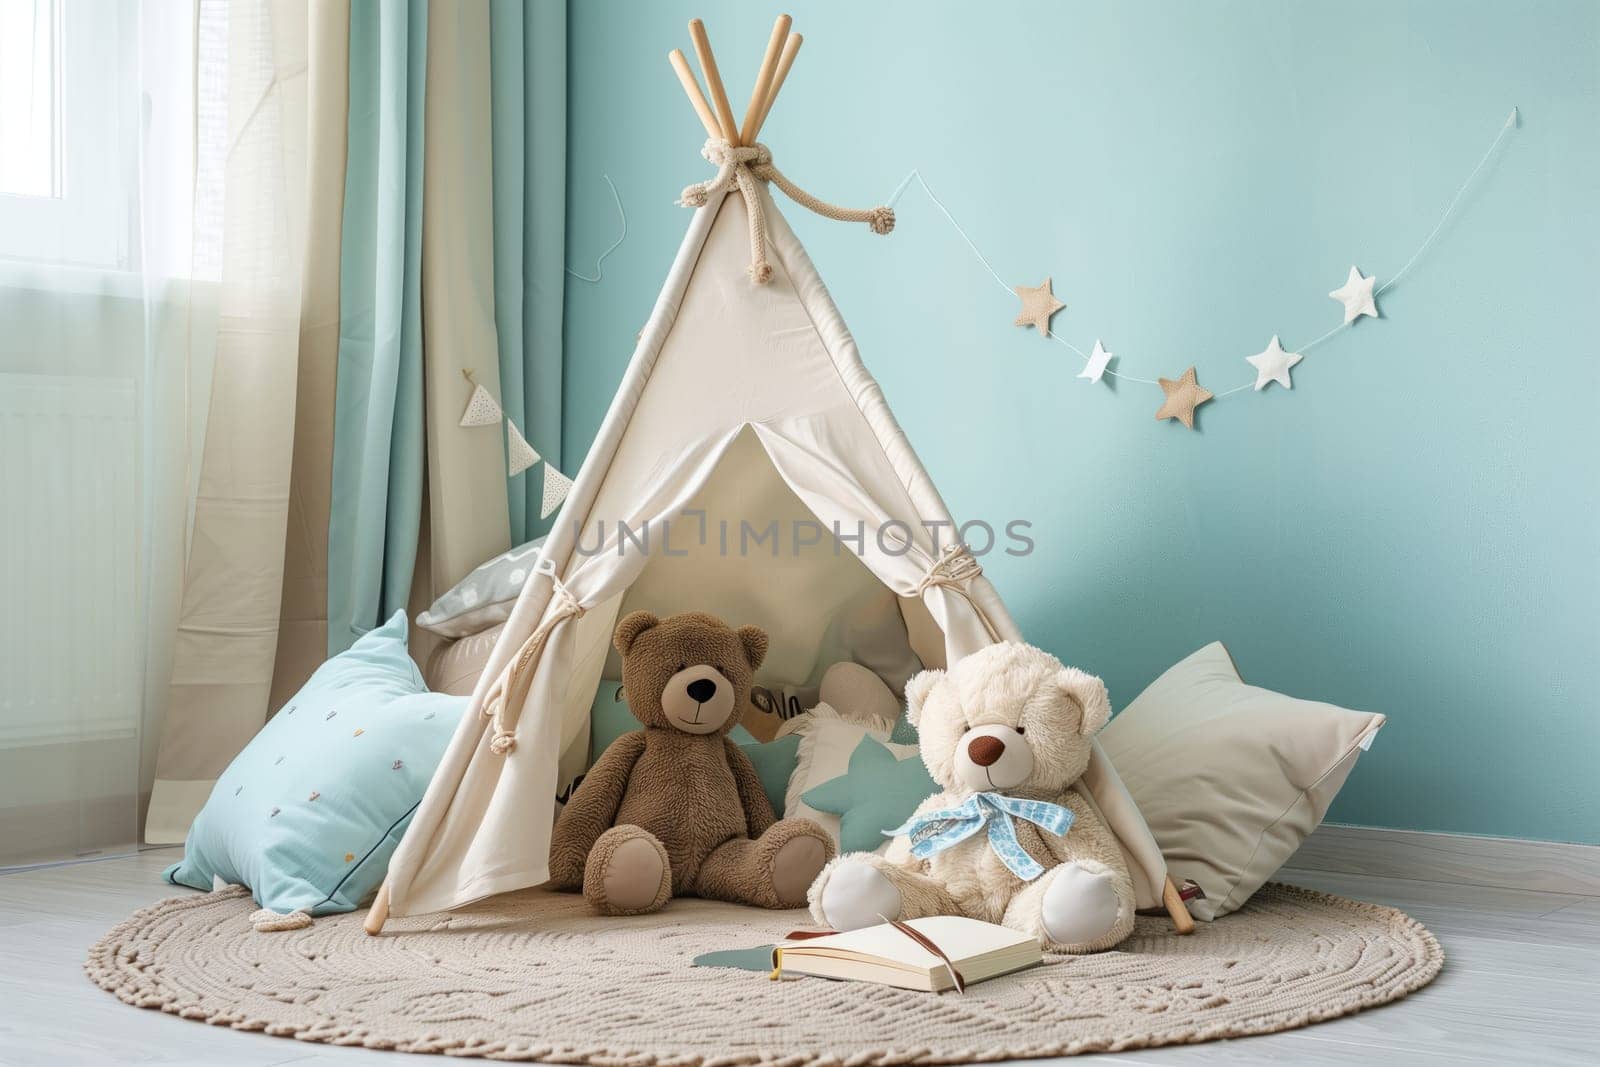 Two teddy bears are nestled inside a teepee in a cozy childs room, adding a touch of comfort and playfulness to the interior design of the bedroom